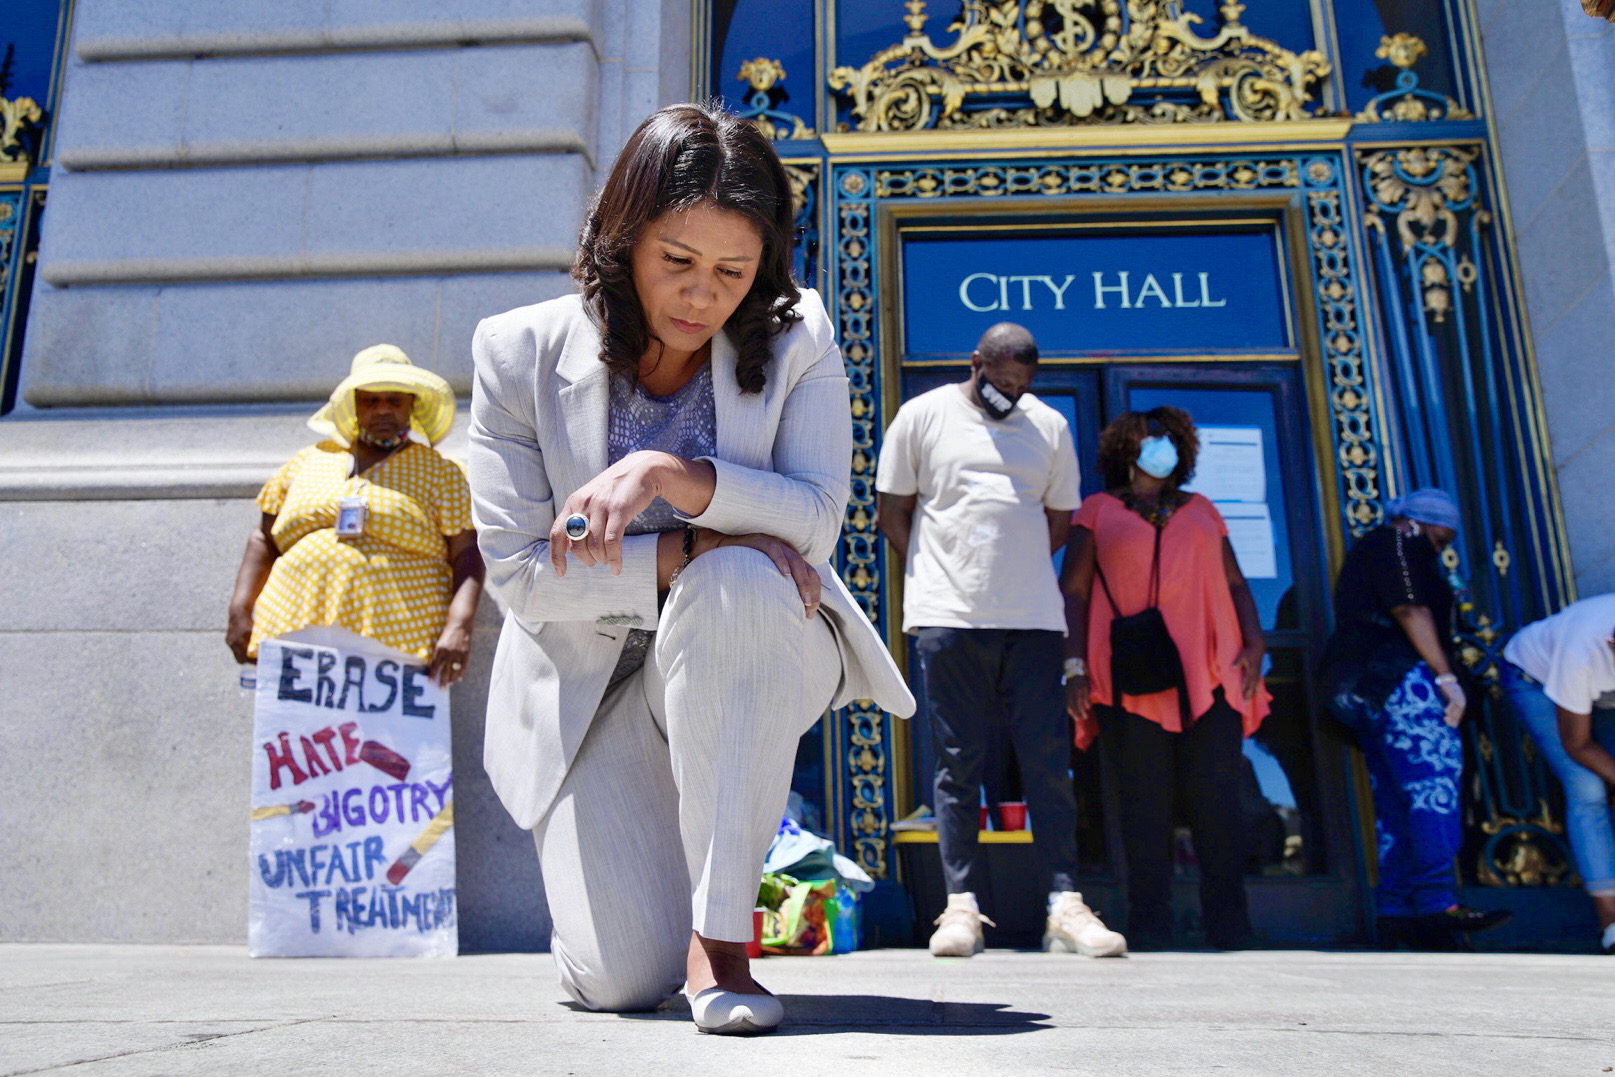 Mayor London Breed kneels on the ground in front of the City Hall entrance, as people hold protest signs in the background.